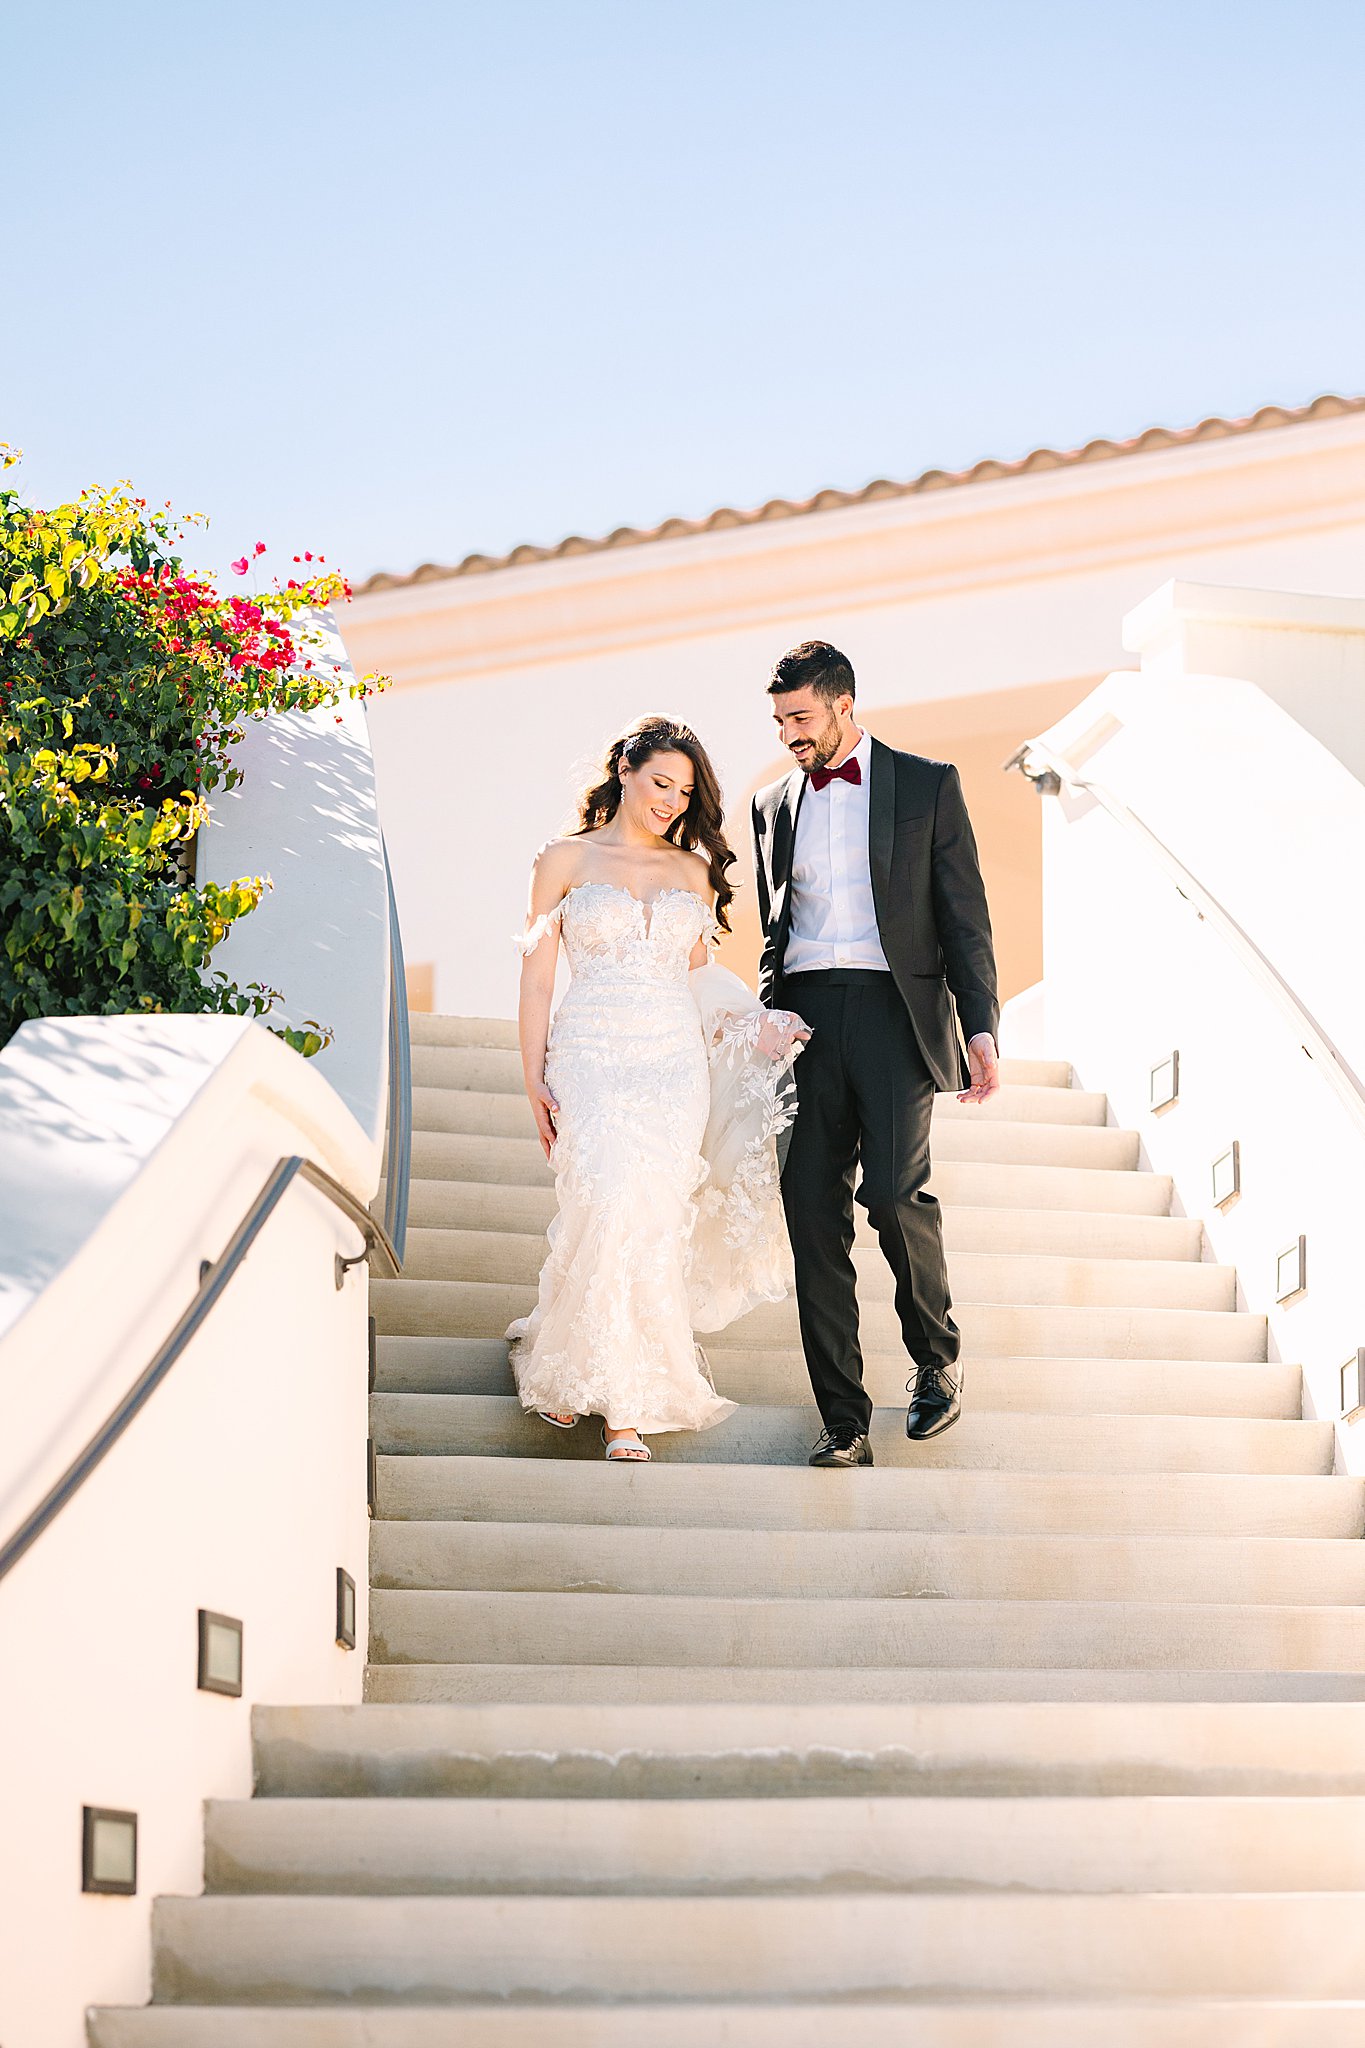 Bride and groom walking down the steps in La Quinta Country club